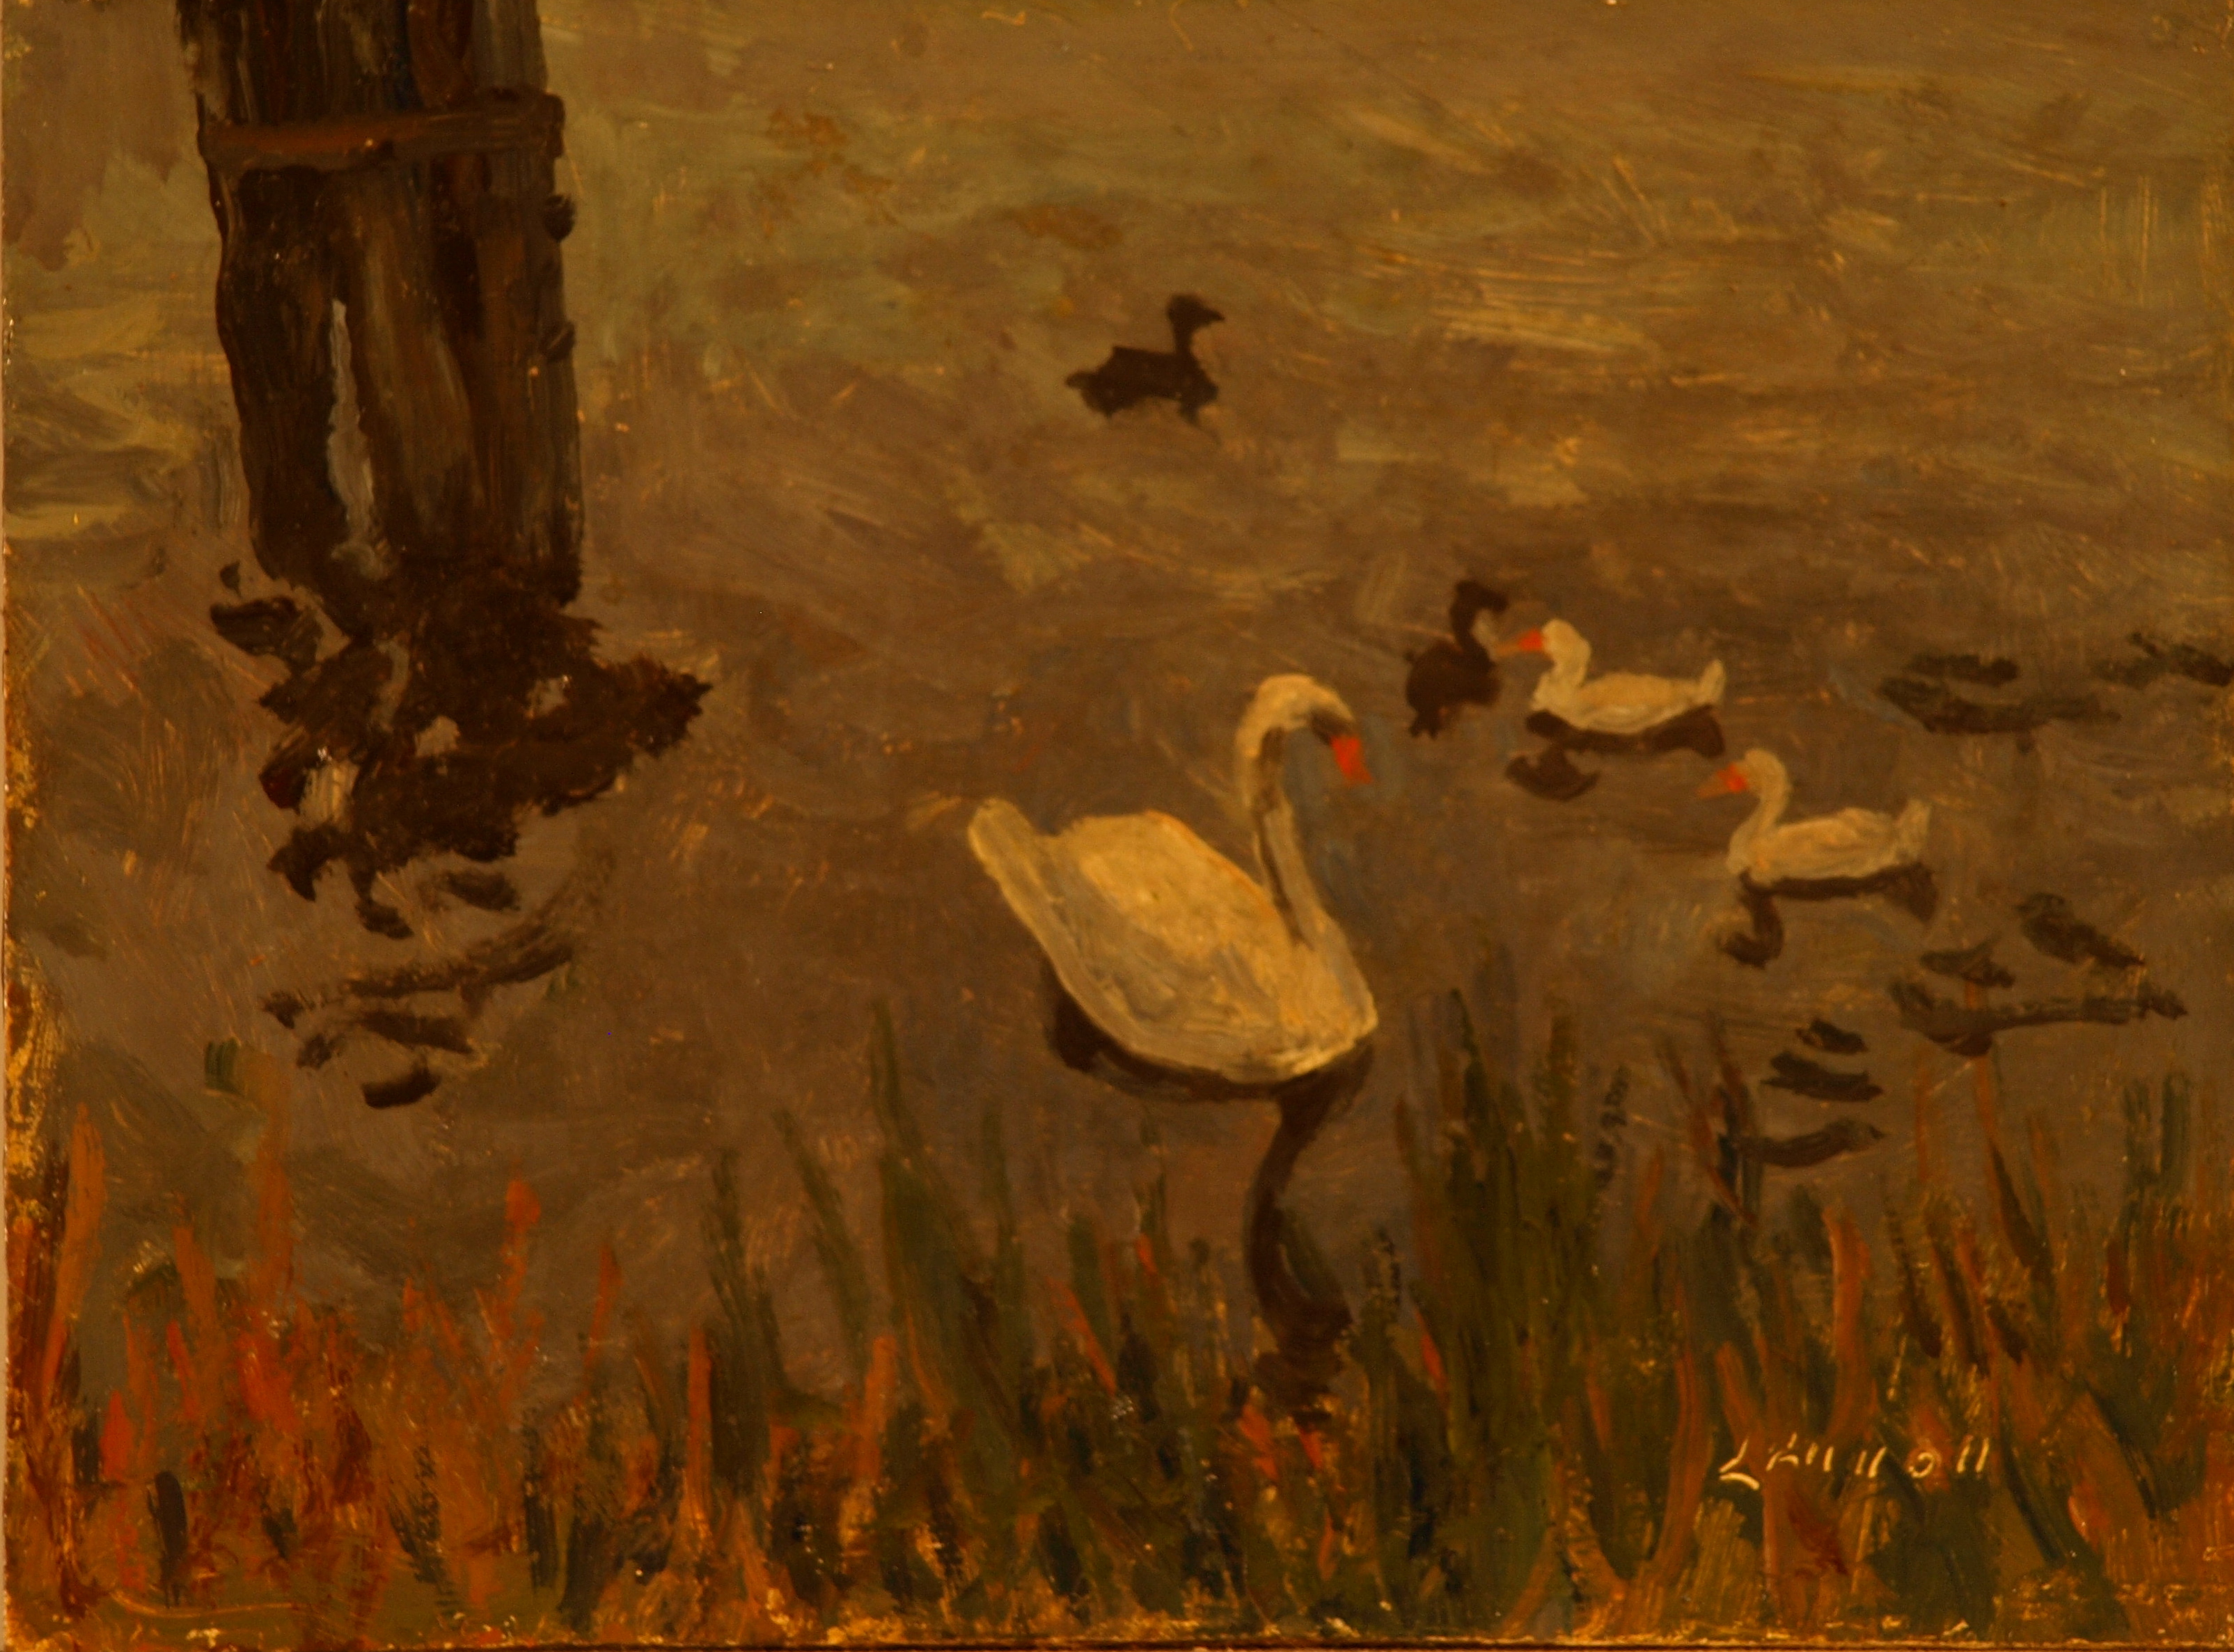 Swan and Ducks, Oil on Panel, 6 x 8 Inches, by Bernard Lennon, $175